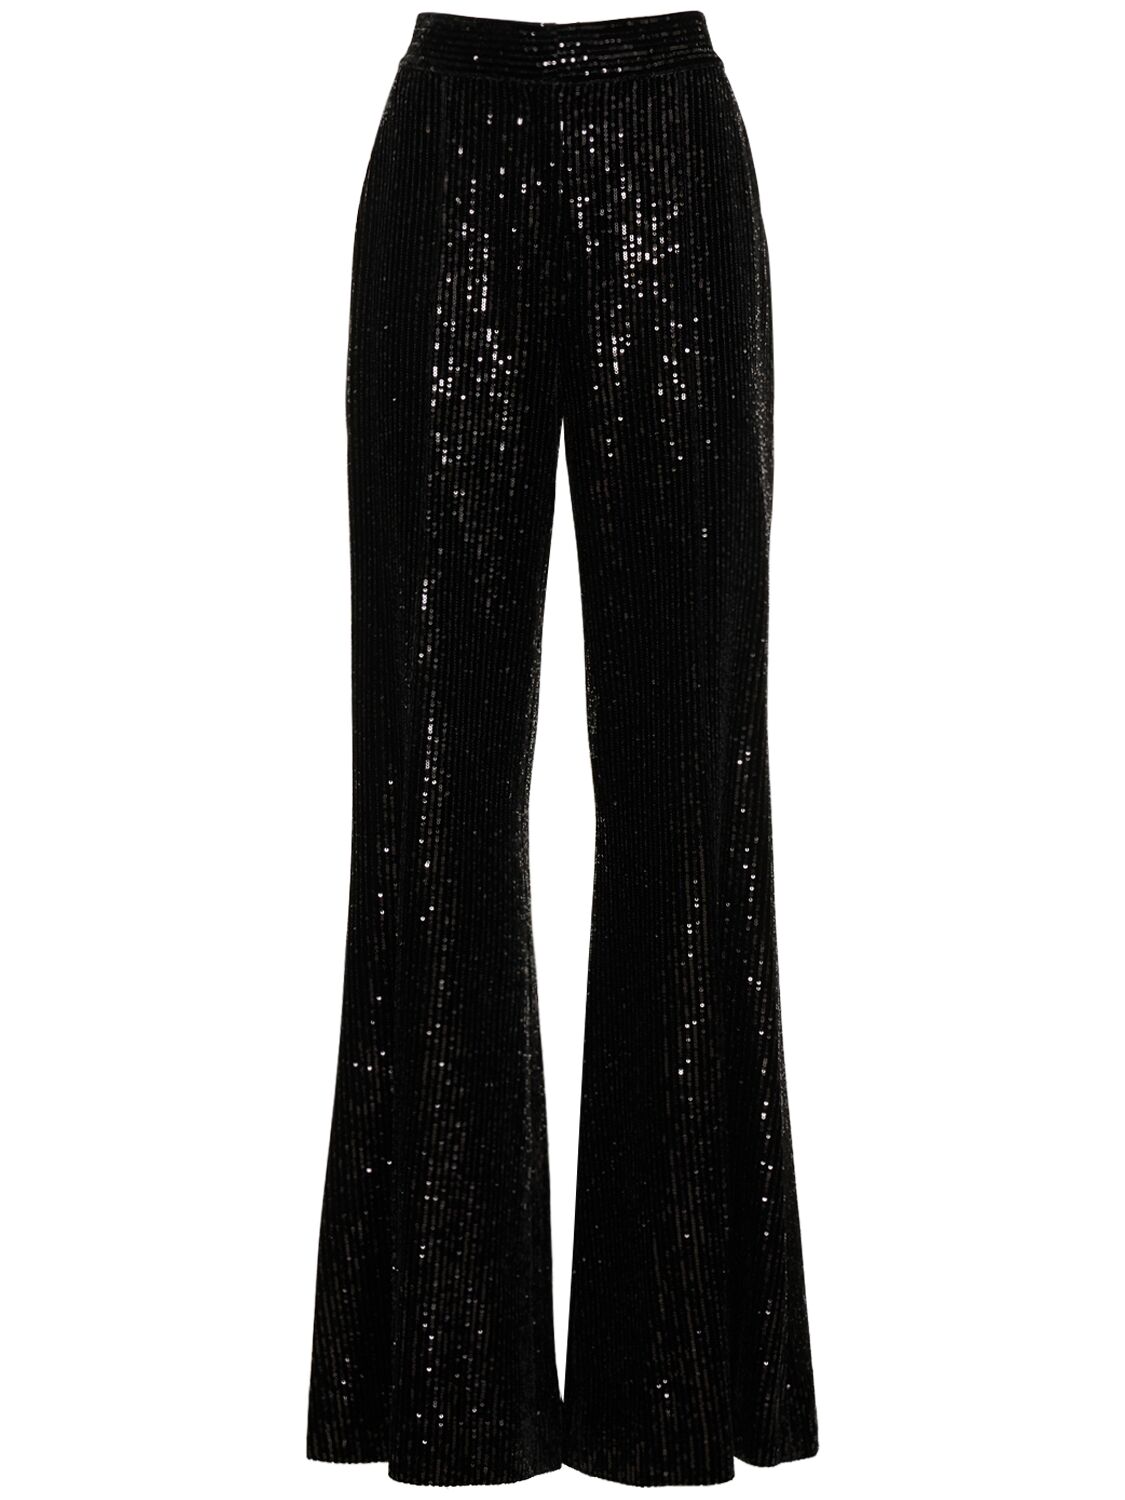 Sequined High Waist Flared Pants – WOMEN > CLOTHING > PANTS